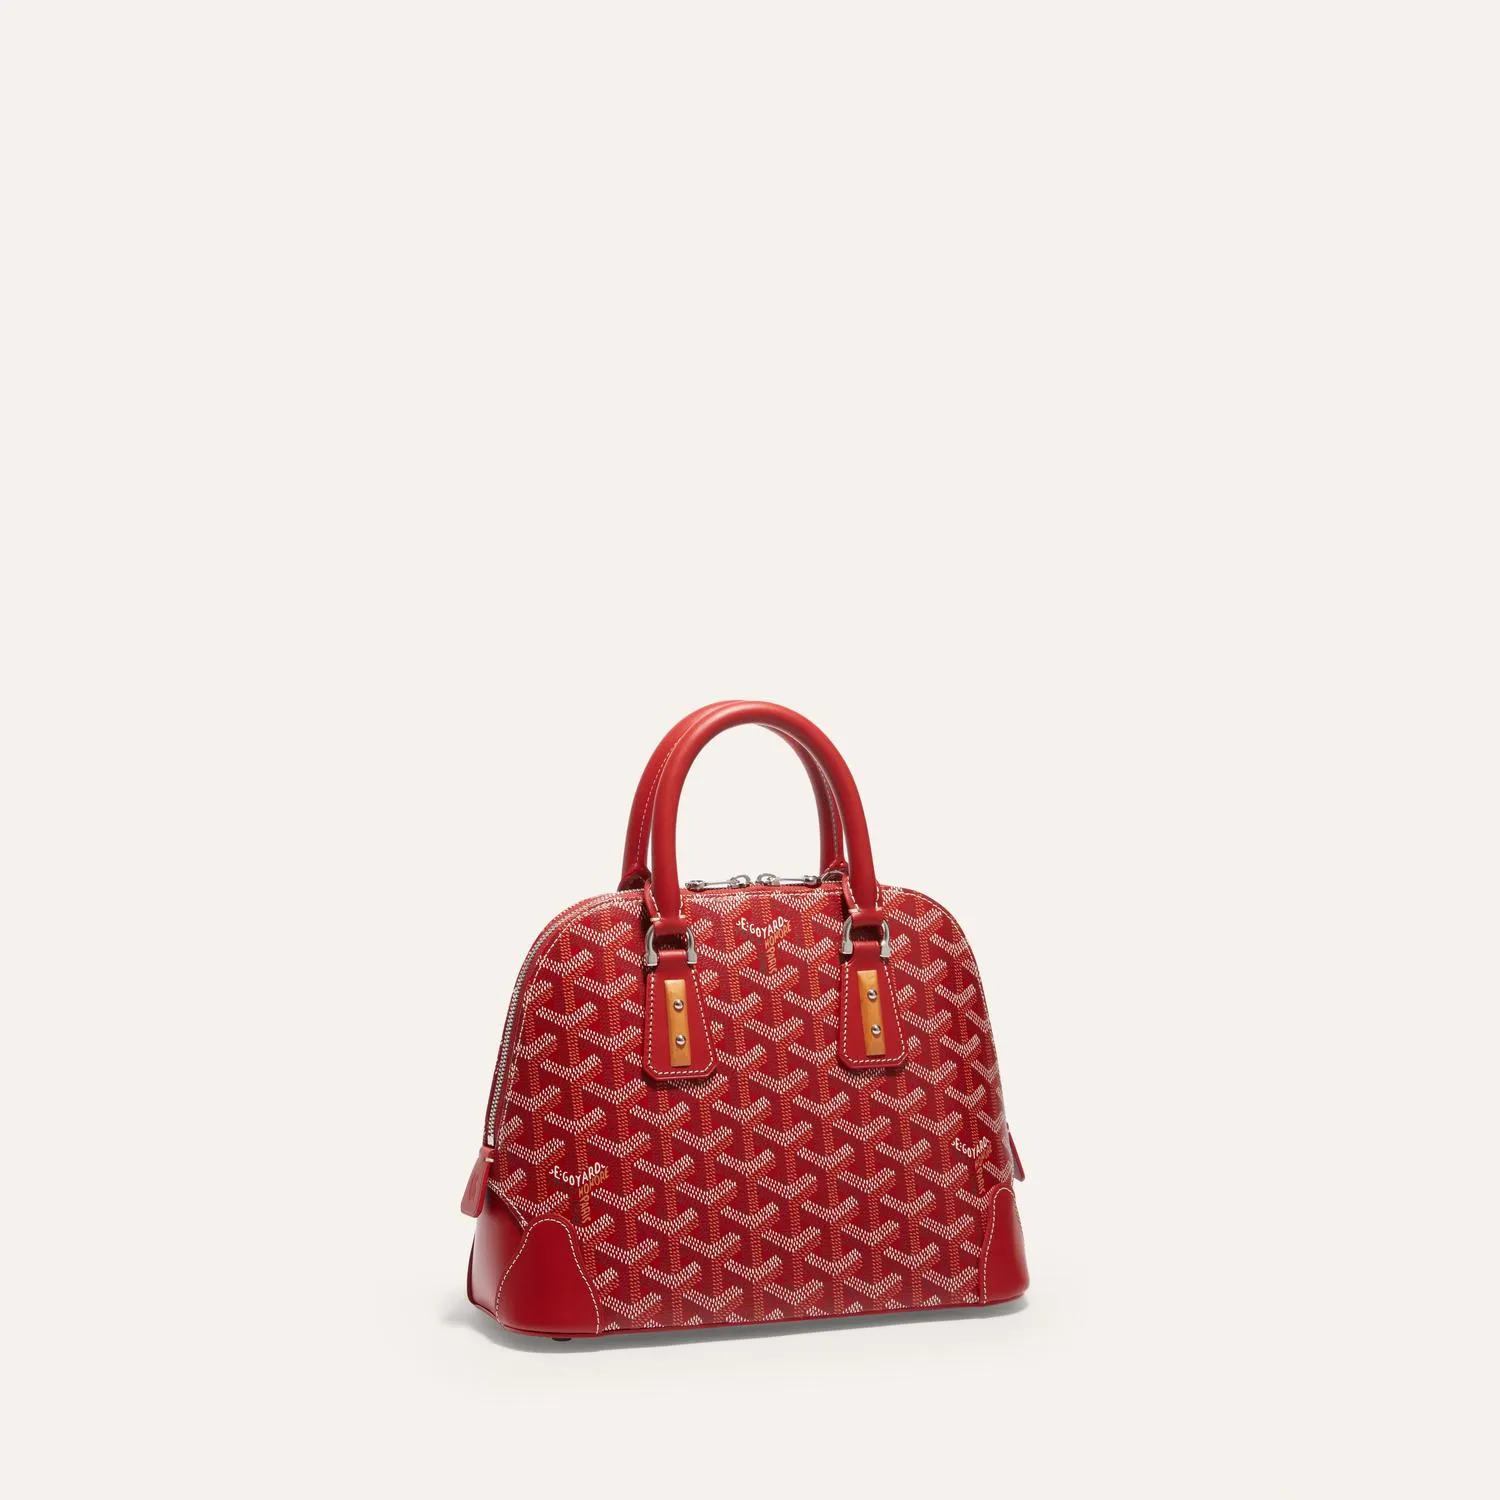 The Absolute 10 Best Goyard Bags To Invest In - Luxe Front